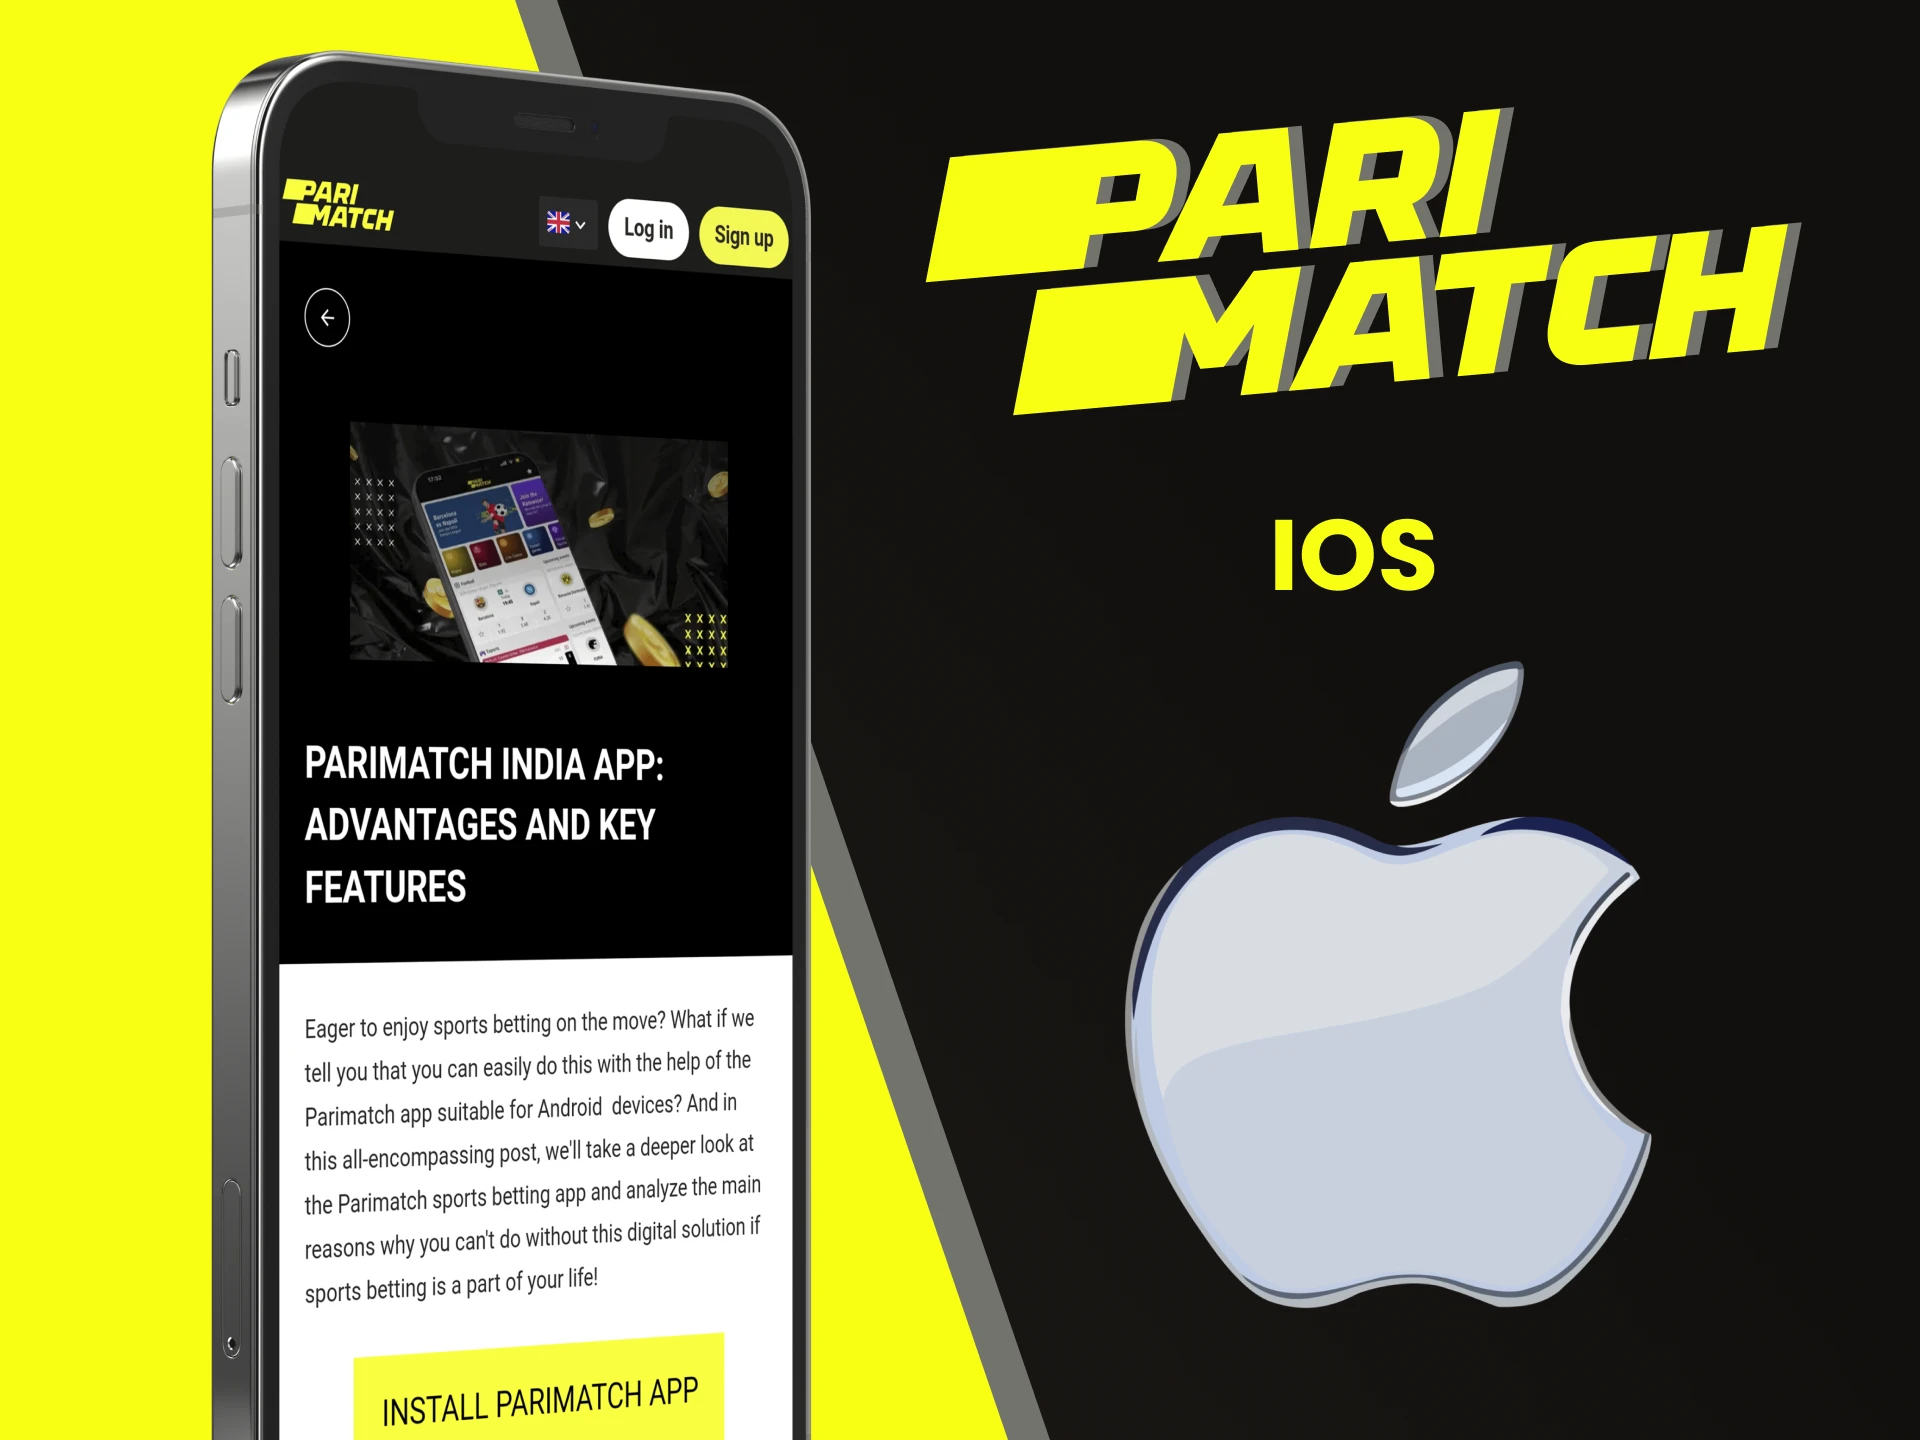 Download the Parimatch app for iOS.